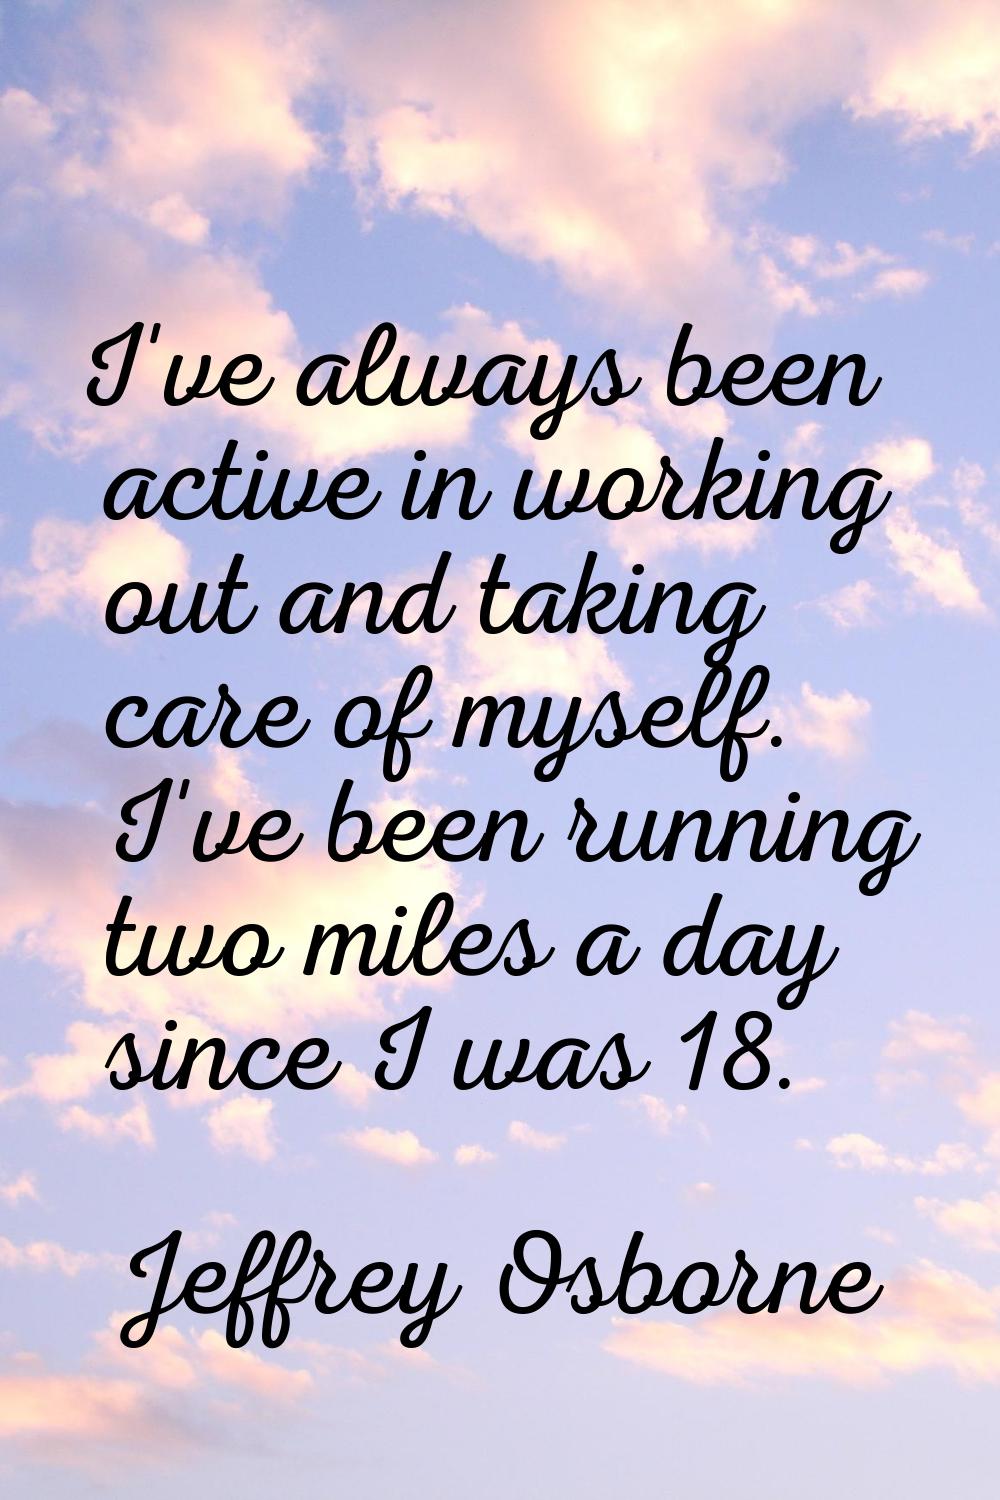 I've always been active in working out and taking care of myself. I've been running two miles a day